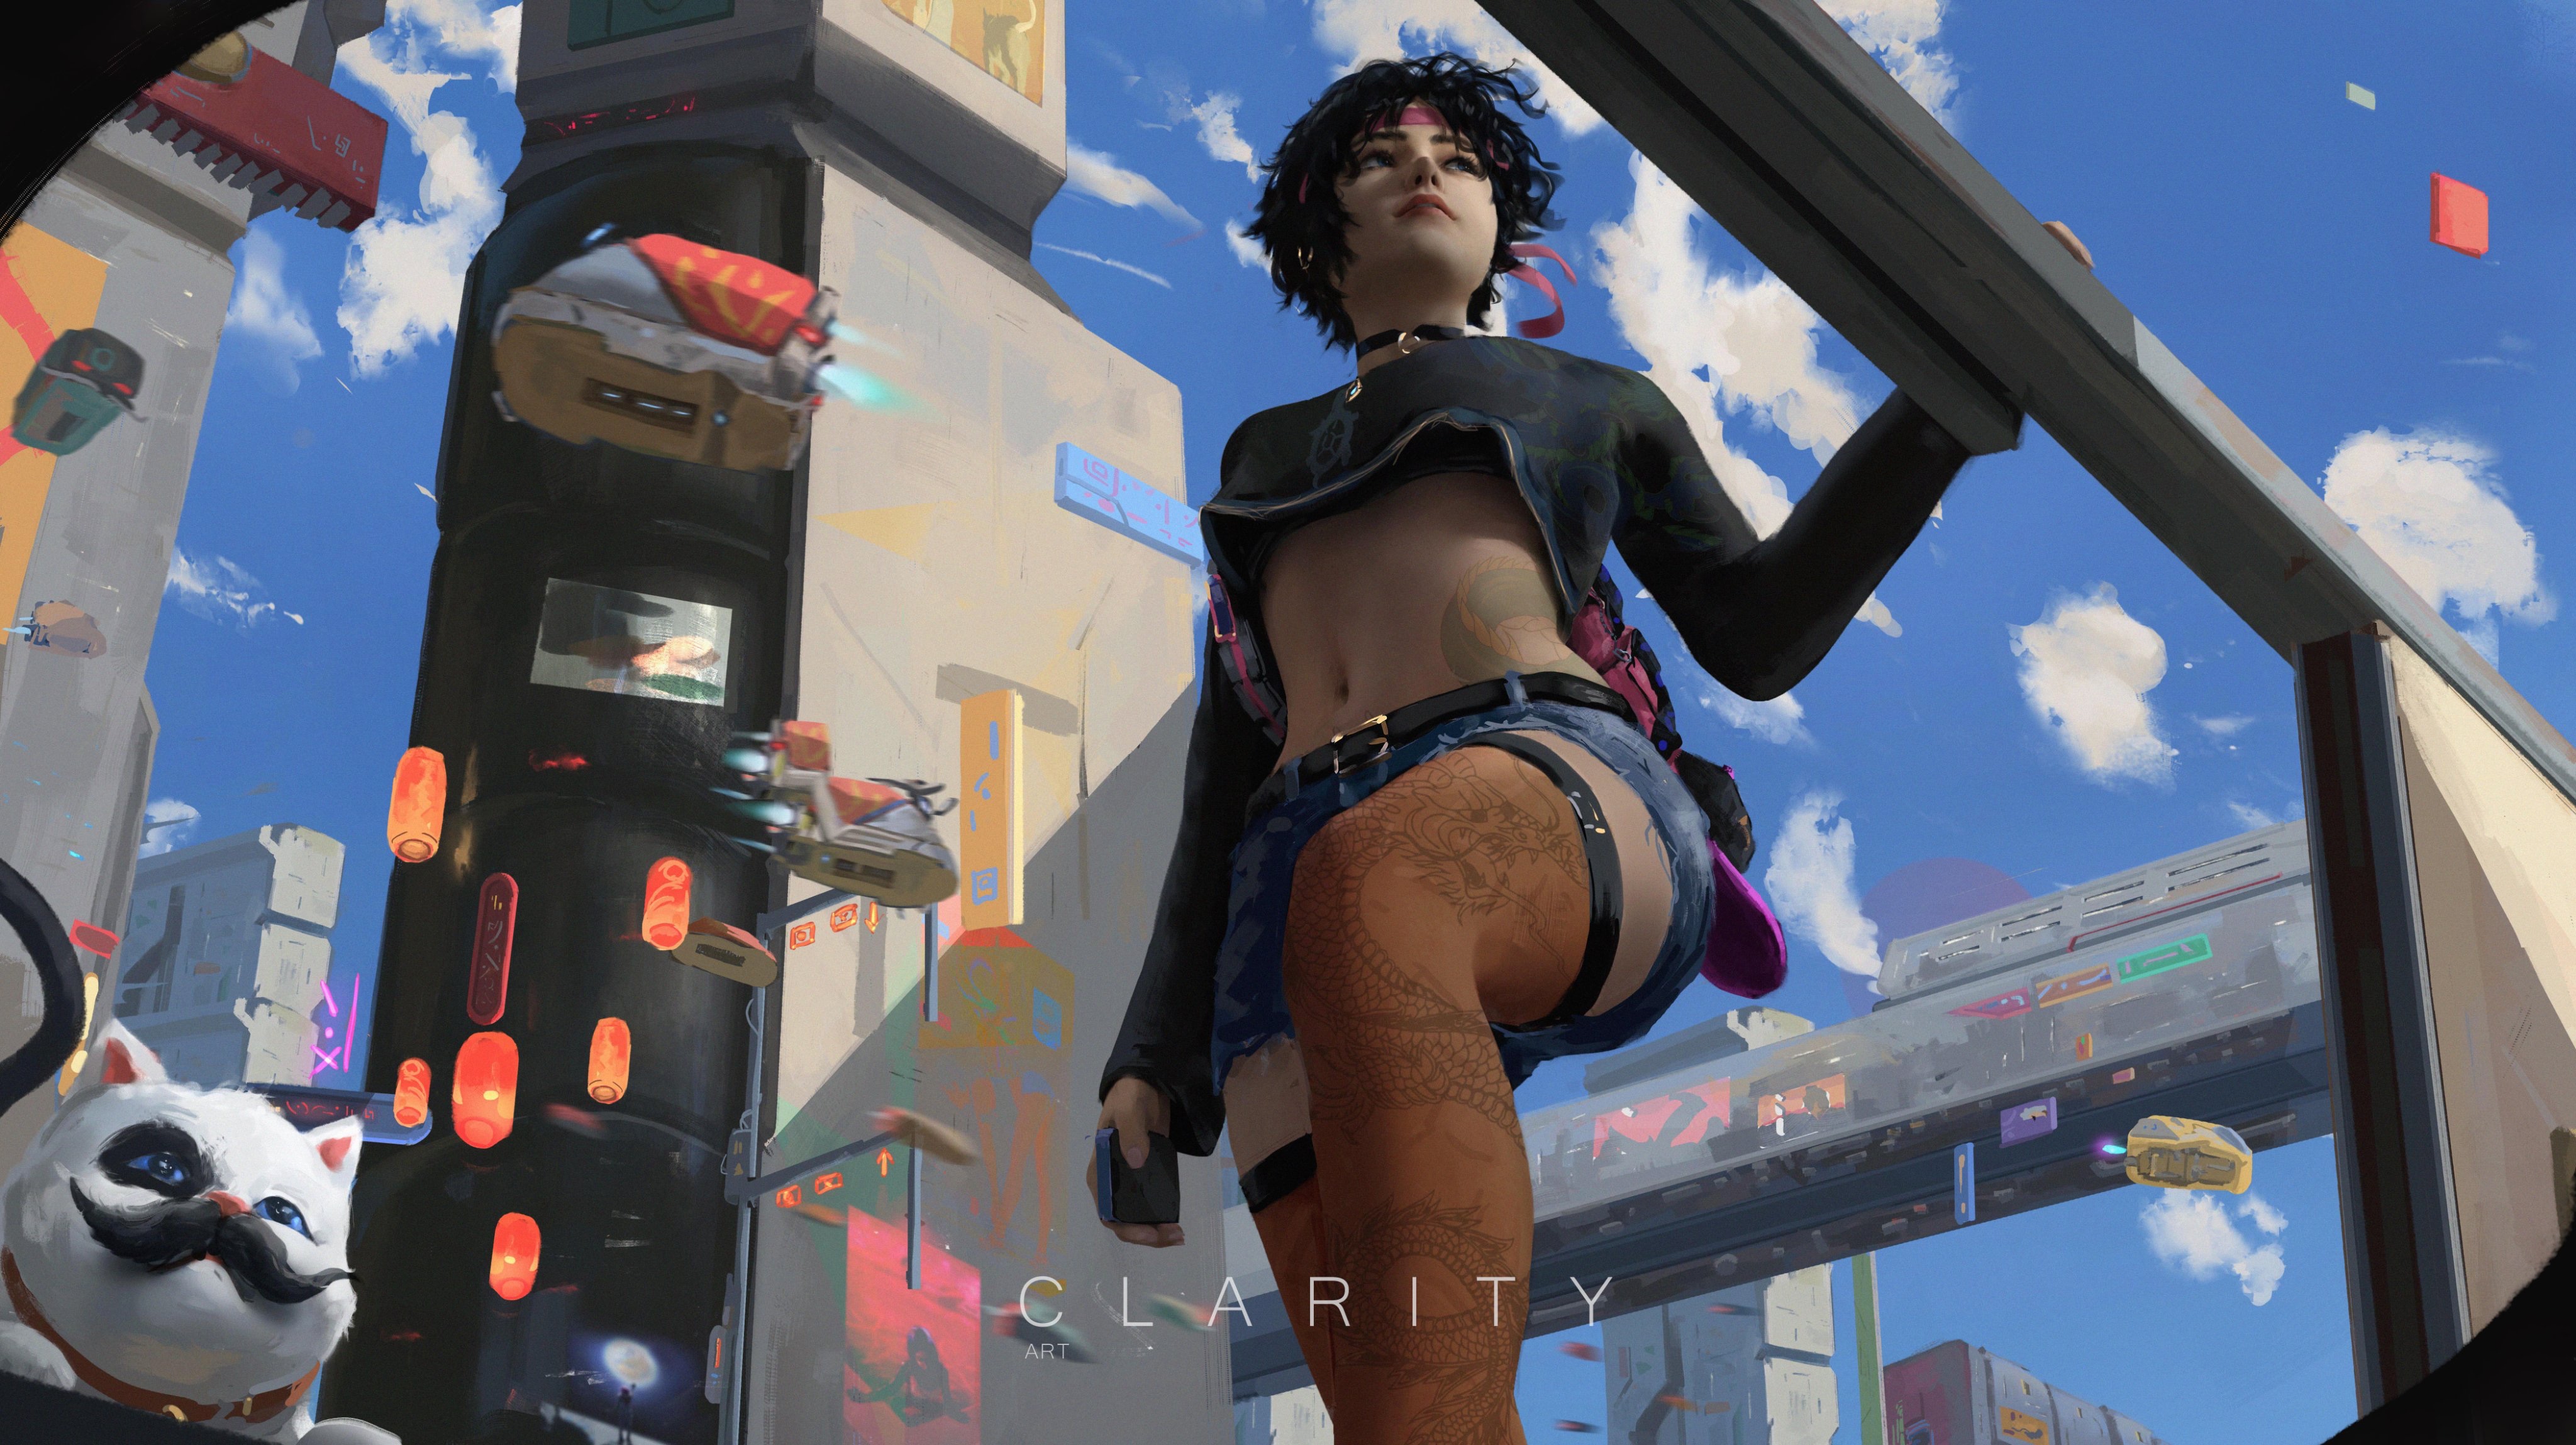 Anime 4096x2297 anime girls original characters cats CLA RITY Chinese dragon belly black hair stockings futuristic science fiction women women futuristic city inked girls jean shorts low-angle anime